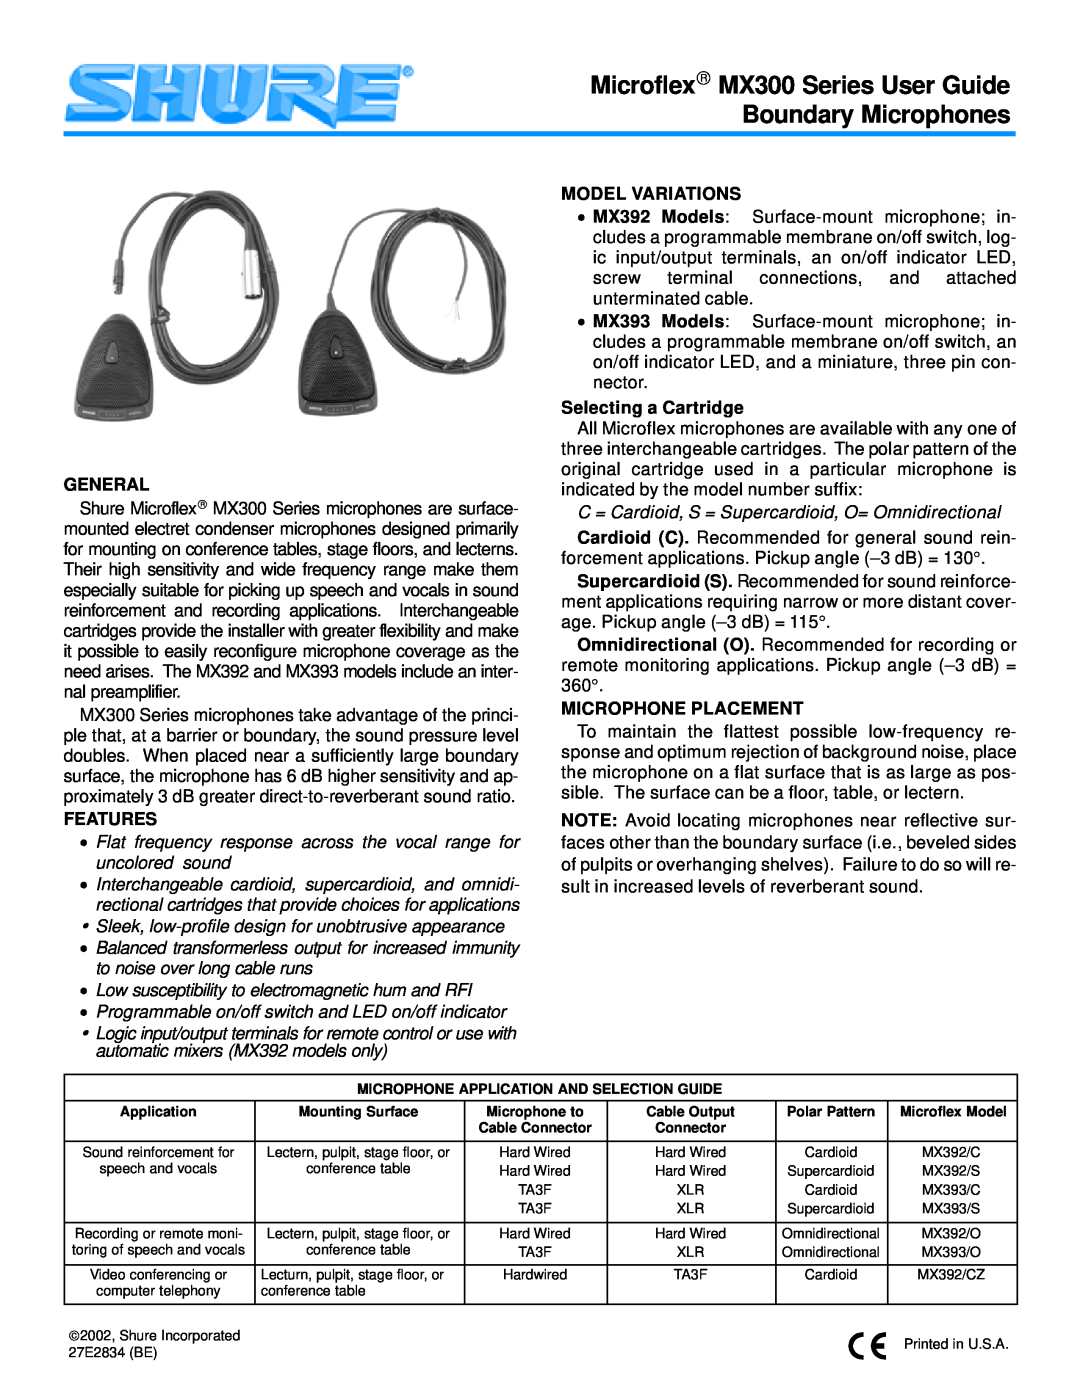 Shure MX300 manual General, Features, Model Variations, Selecting a Cartridge, Microphone Placement 